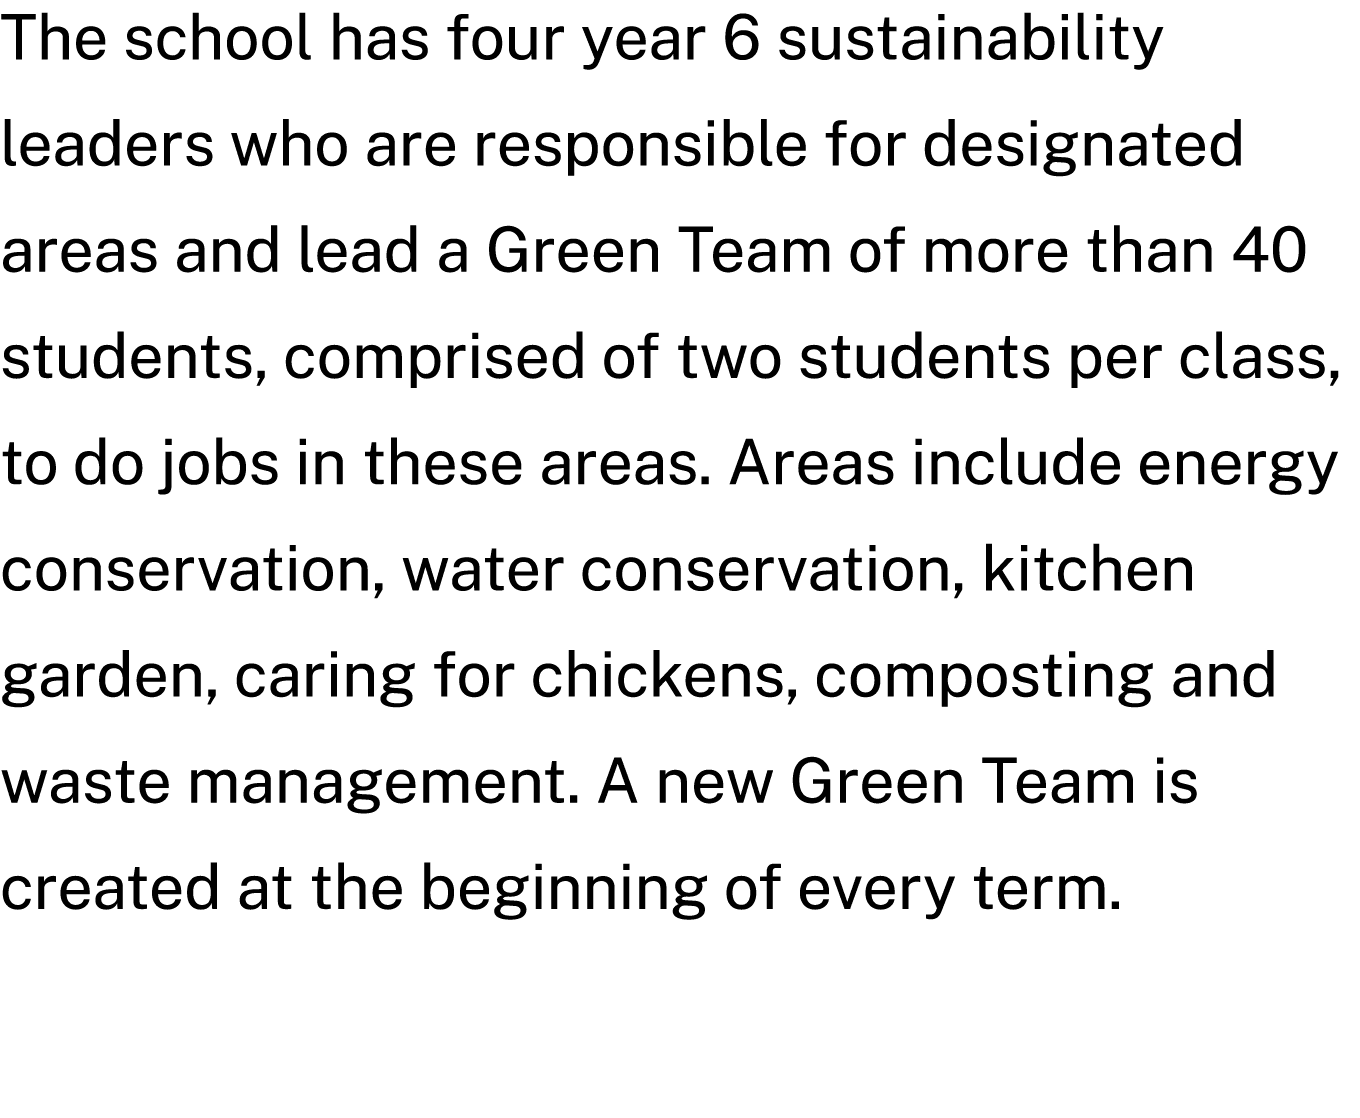 The school has four year 6 sustainability leaders who are responsible for designated areas and lead a Green Team of m...